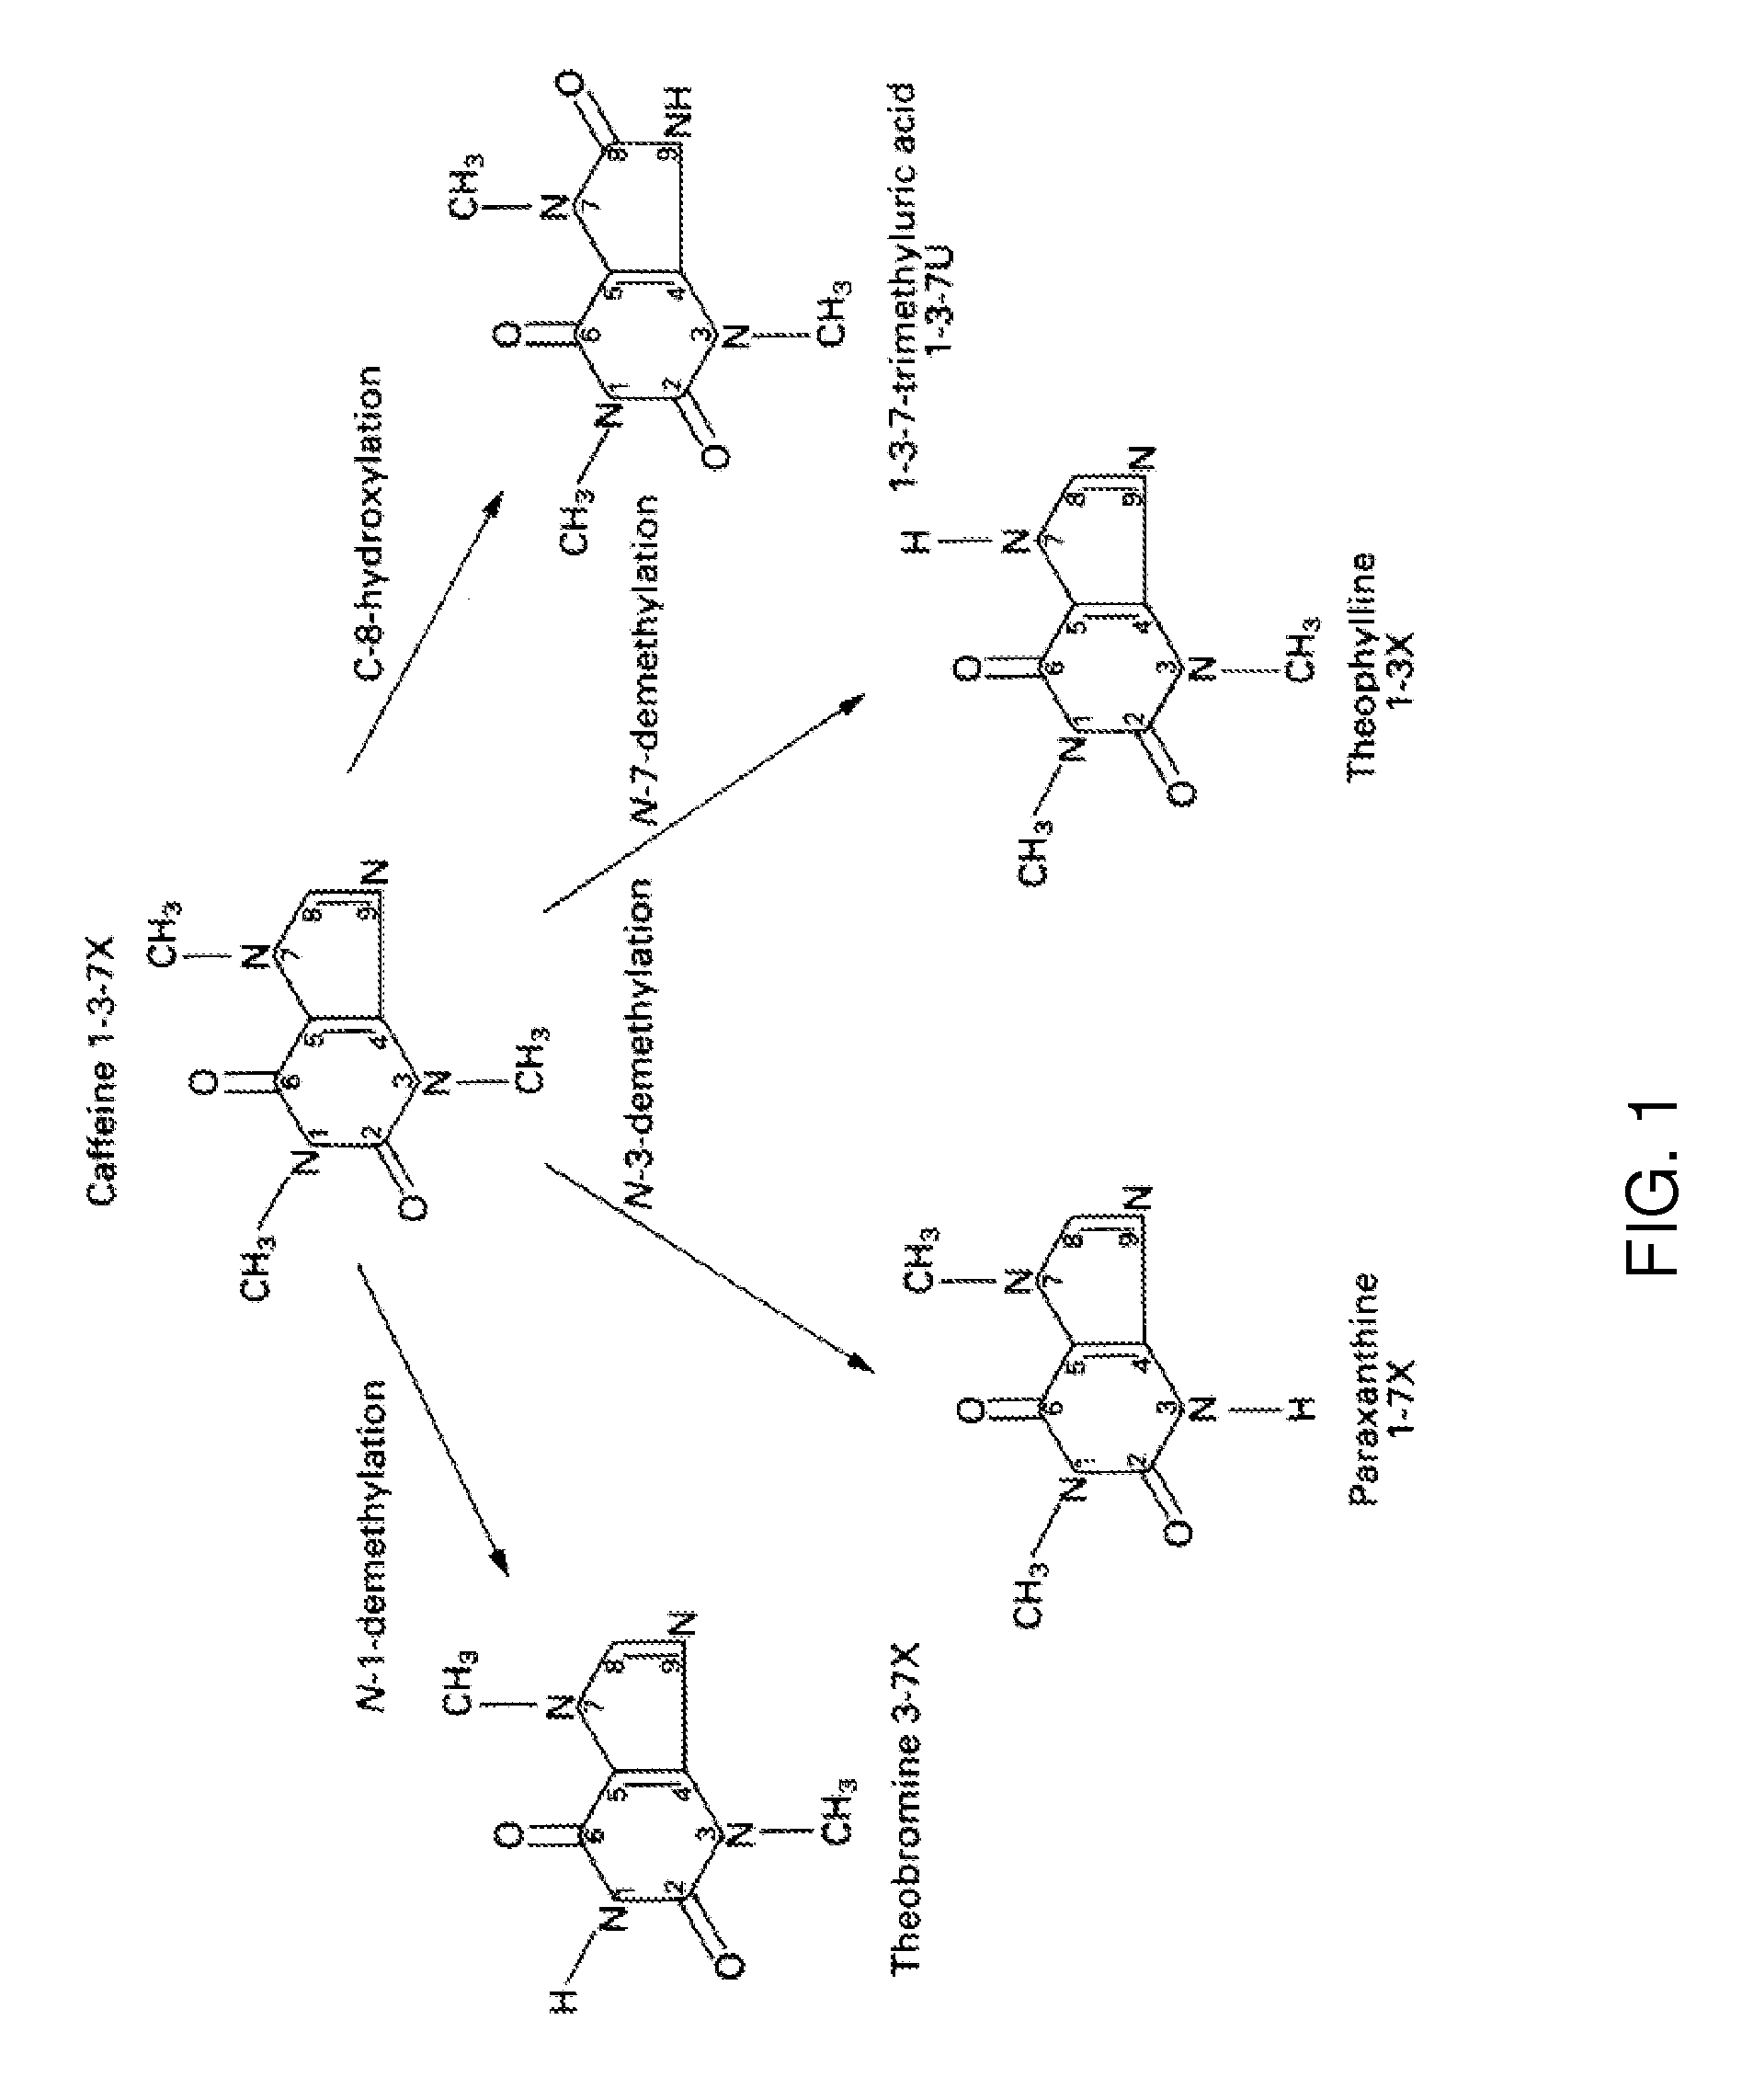 Rutaecarpine derivatives for activating cyp1a2 in a subject